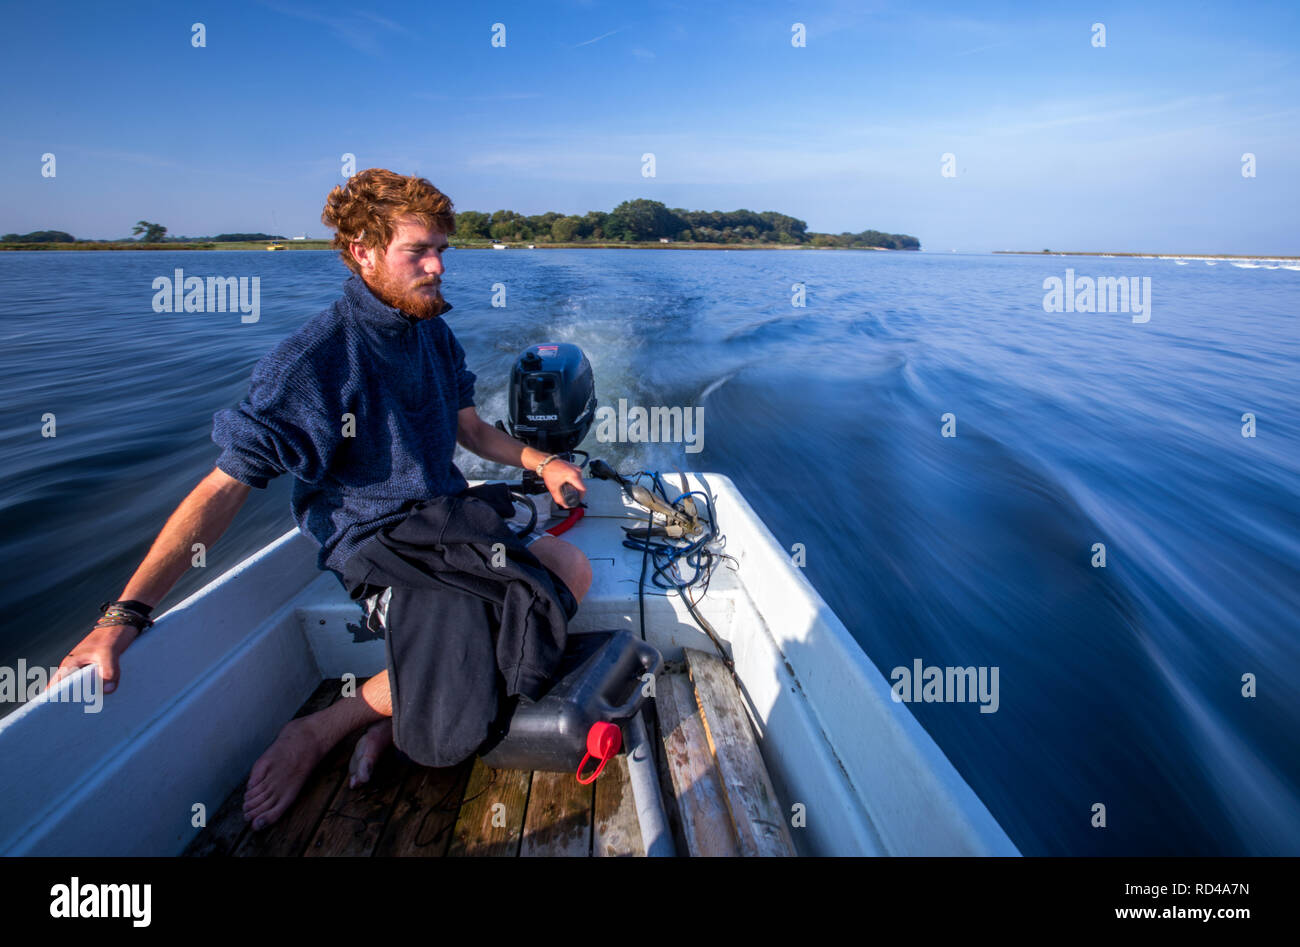 05 September 2018, Mecklenburg-Western Pomerania, Malchow (poel): Samuel Mühlichen, a federal volunteer, takes a small boat to the bird sanctuary island Langenwerder. Ornithologists count and ring thousands of migratory birds every autumn on the 21-hectare island off the Baltic island of Poel. The island in Wismar Bay, which has been a nature reserve since 1937, is Mecklenburg's oldest seabird sanctuary. From spring to mid-November, the barren island is inhabited by volunteers. Photo: Jens Büttner/dpa-Zentralbild/ZB Stock Photo